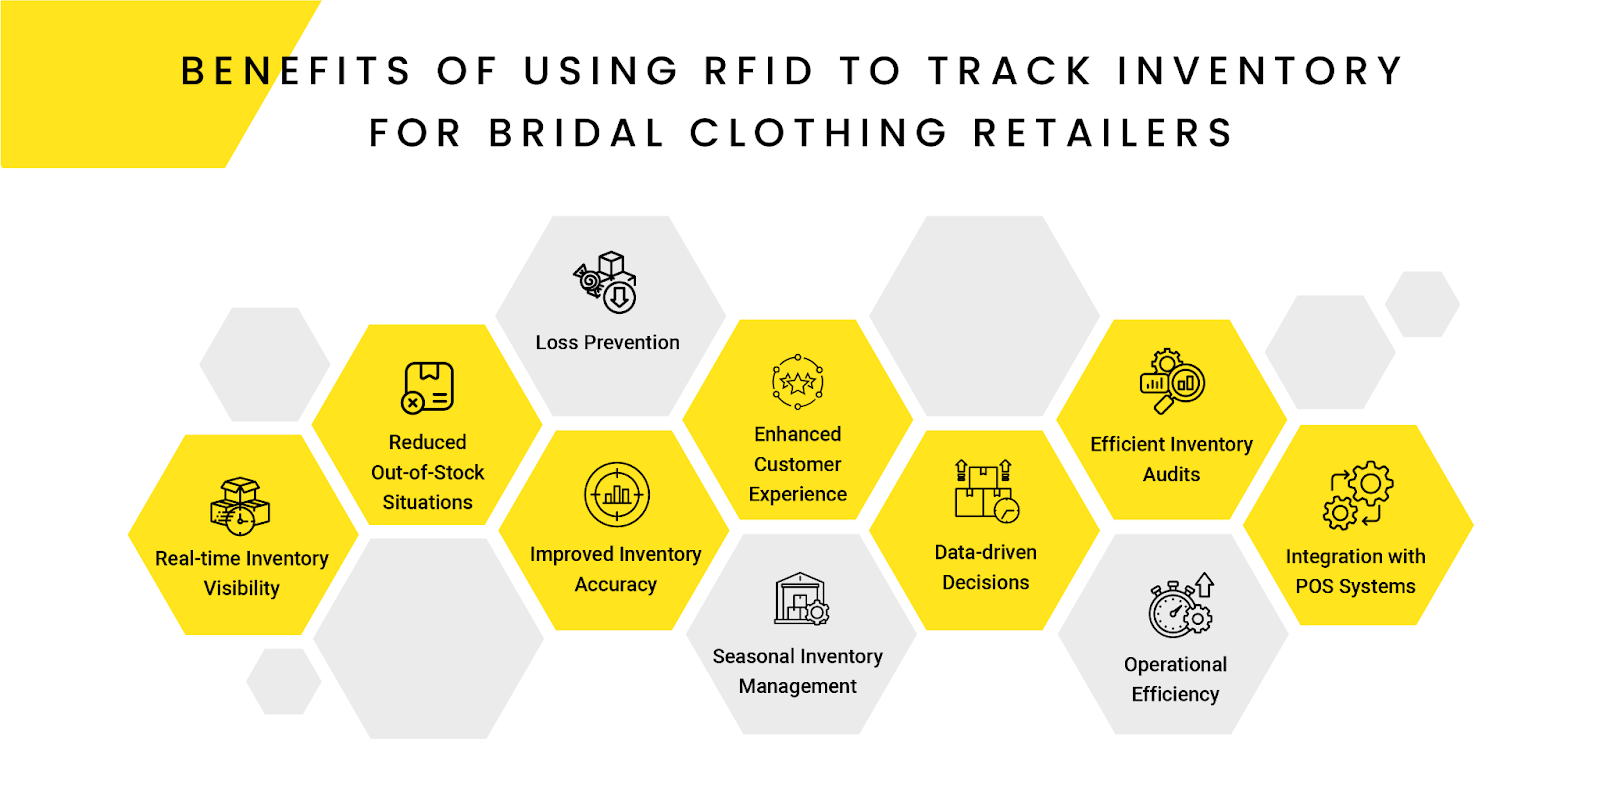 Benefits of RFID technology to track inventory for Bridal clothing retailers